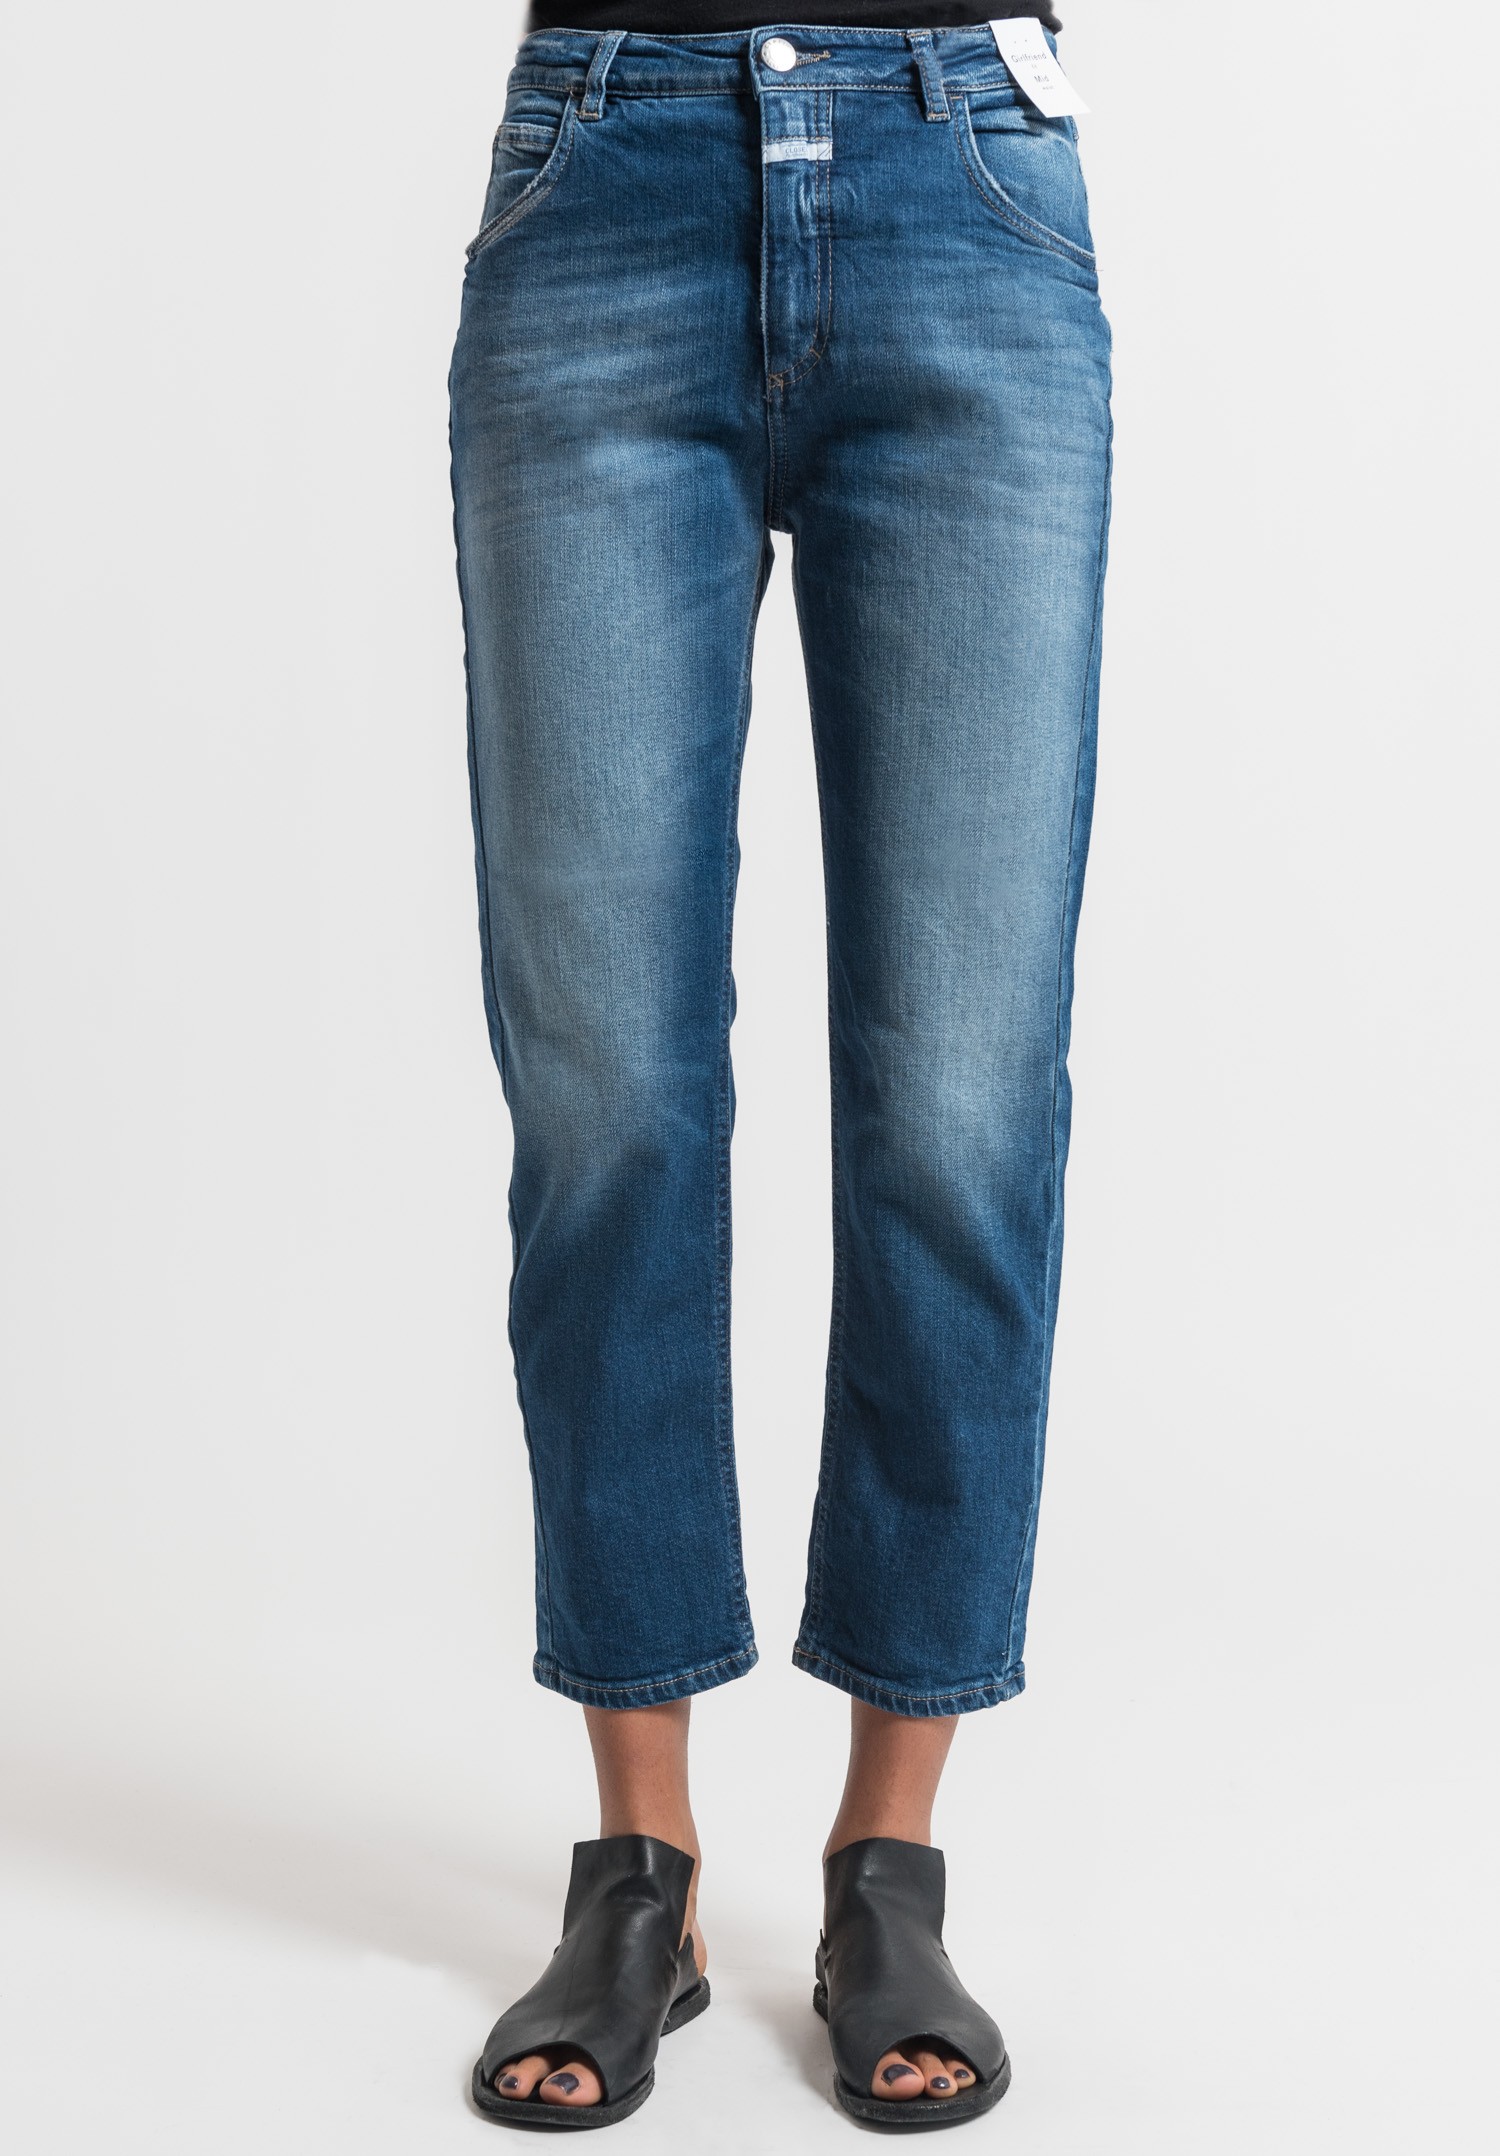 hsn diane gilman bootcut jeans clearance